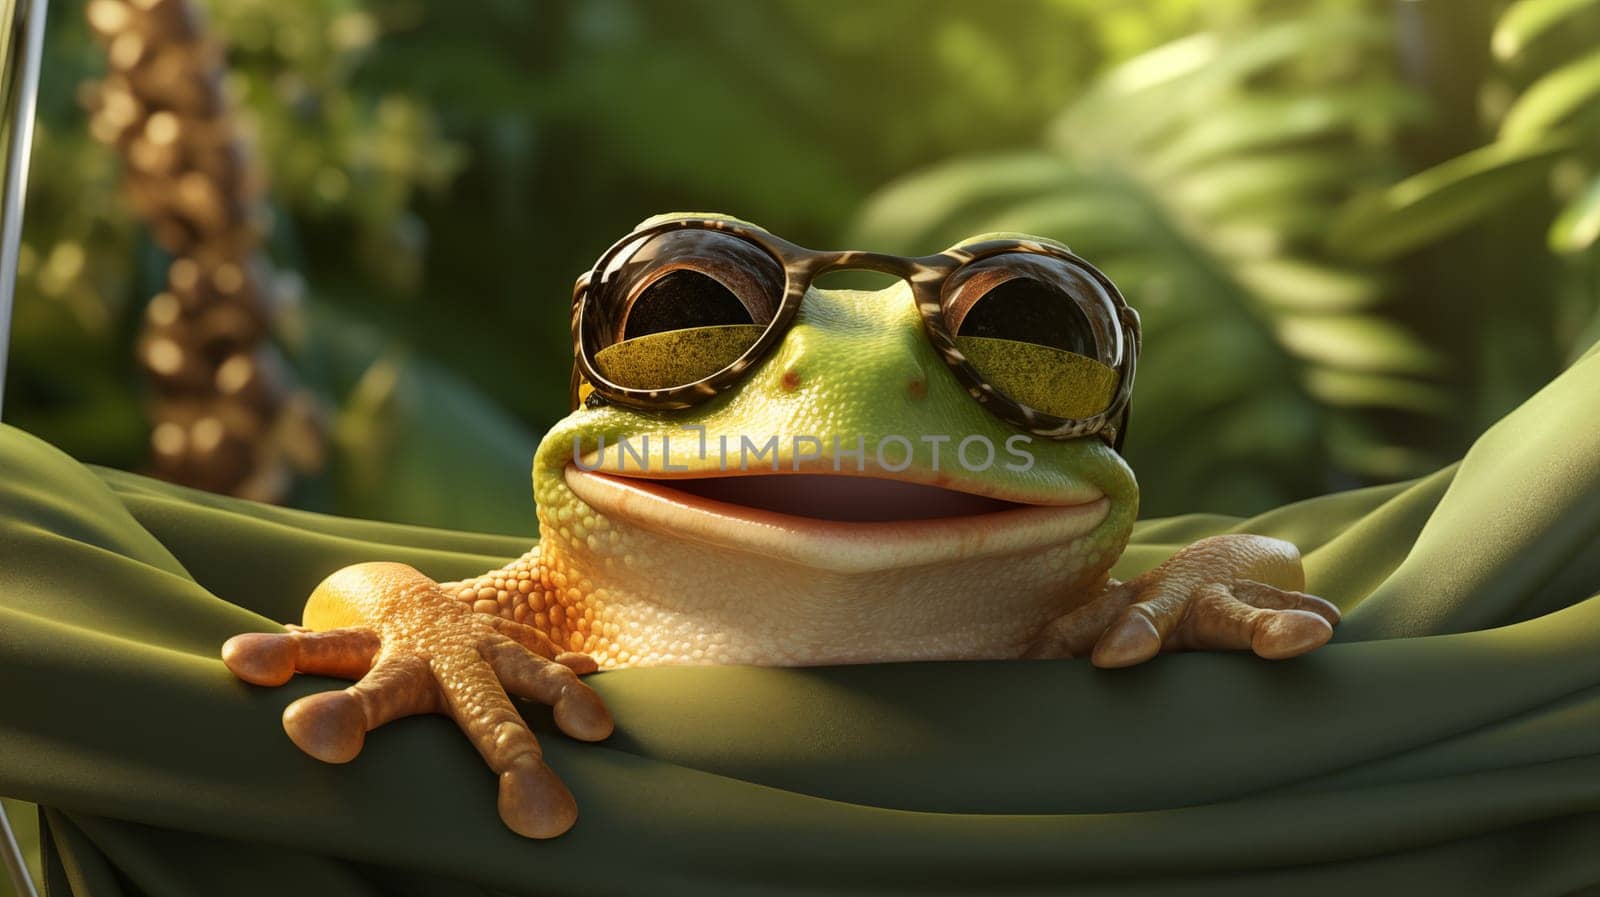 An smiling frog wearing sunglasses, casually lounging on an green hammock with a tropical backdrop.